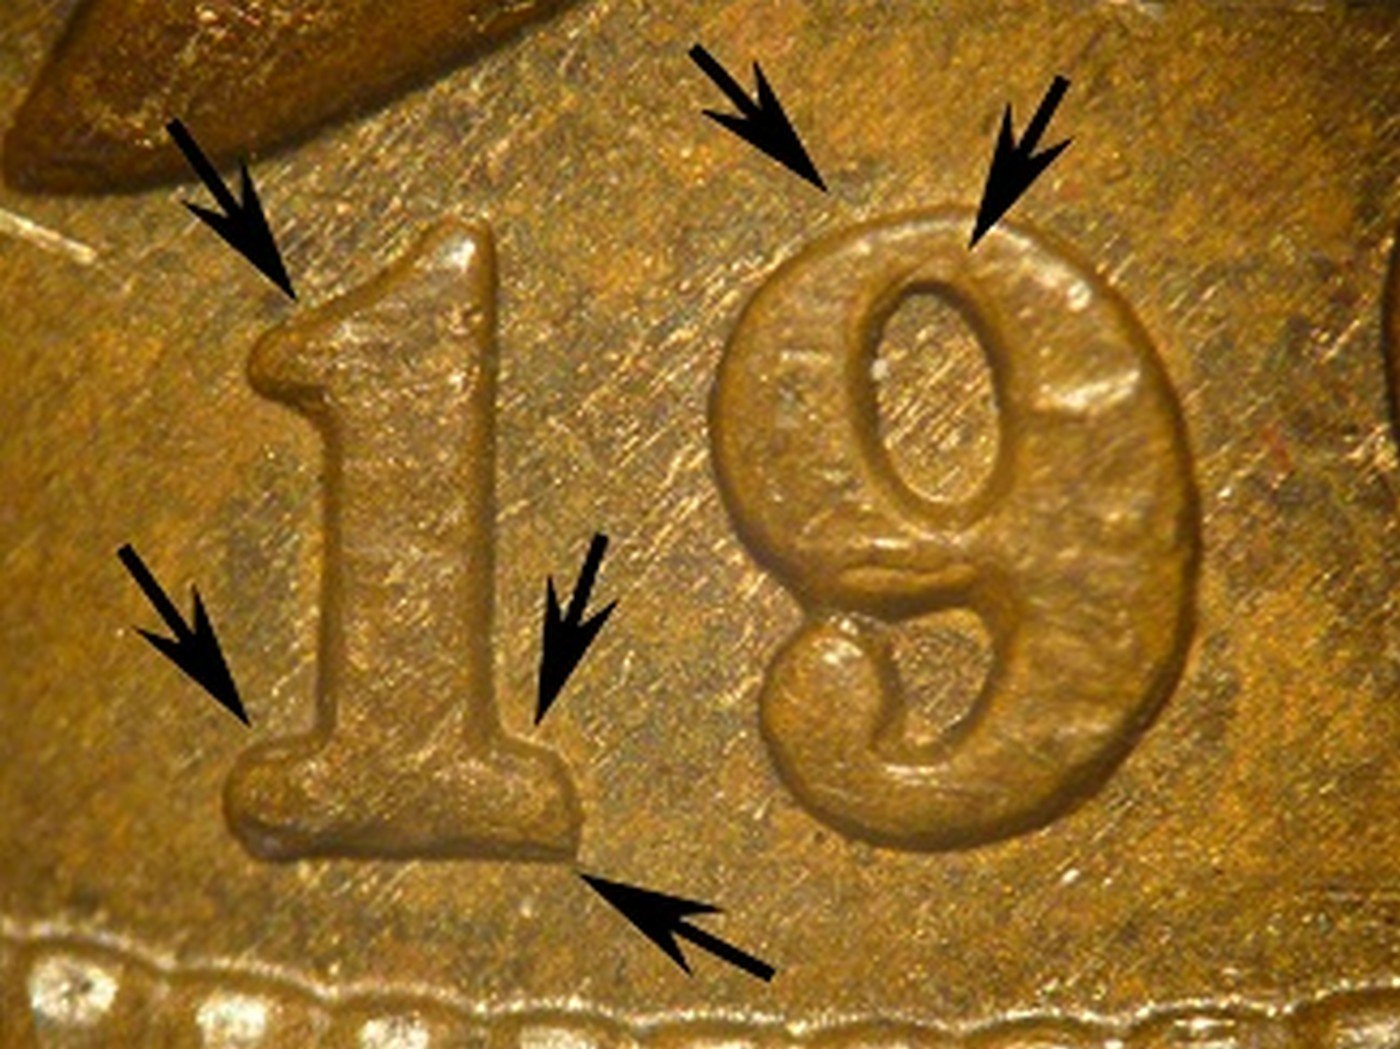 1906 RPD-052 - Indian Head Penny - Photo by David Poliquin